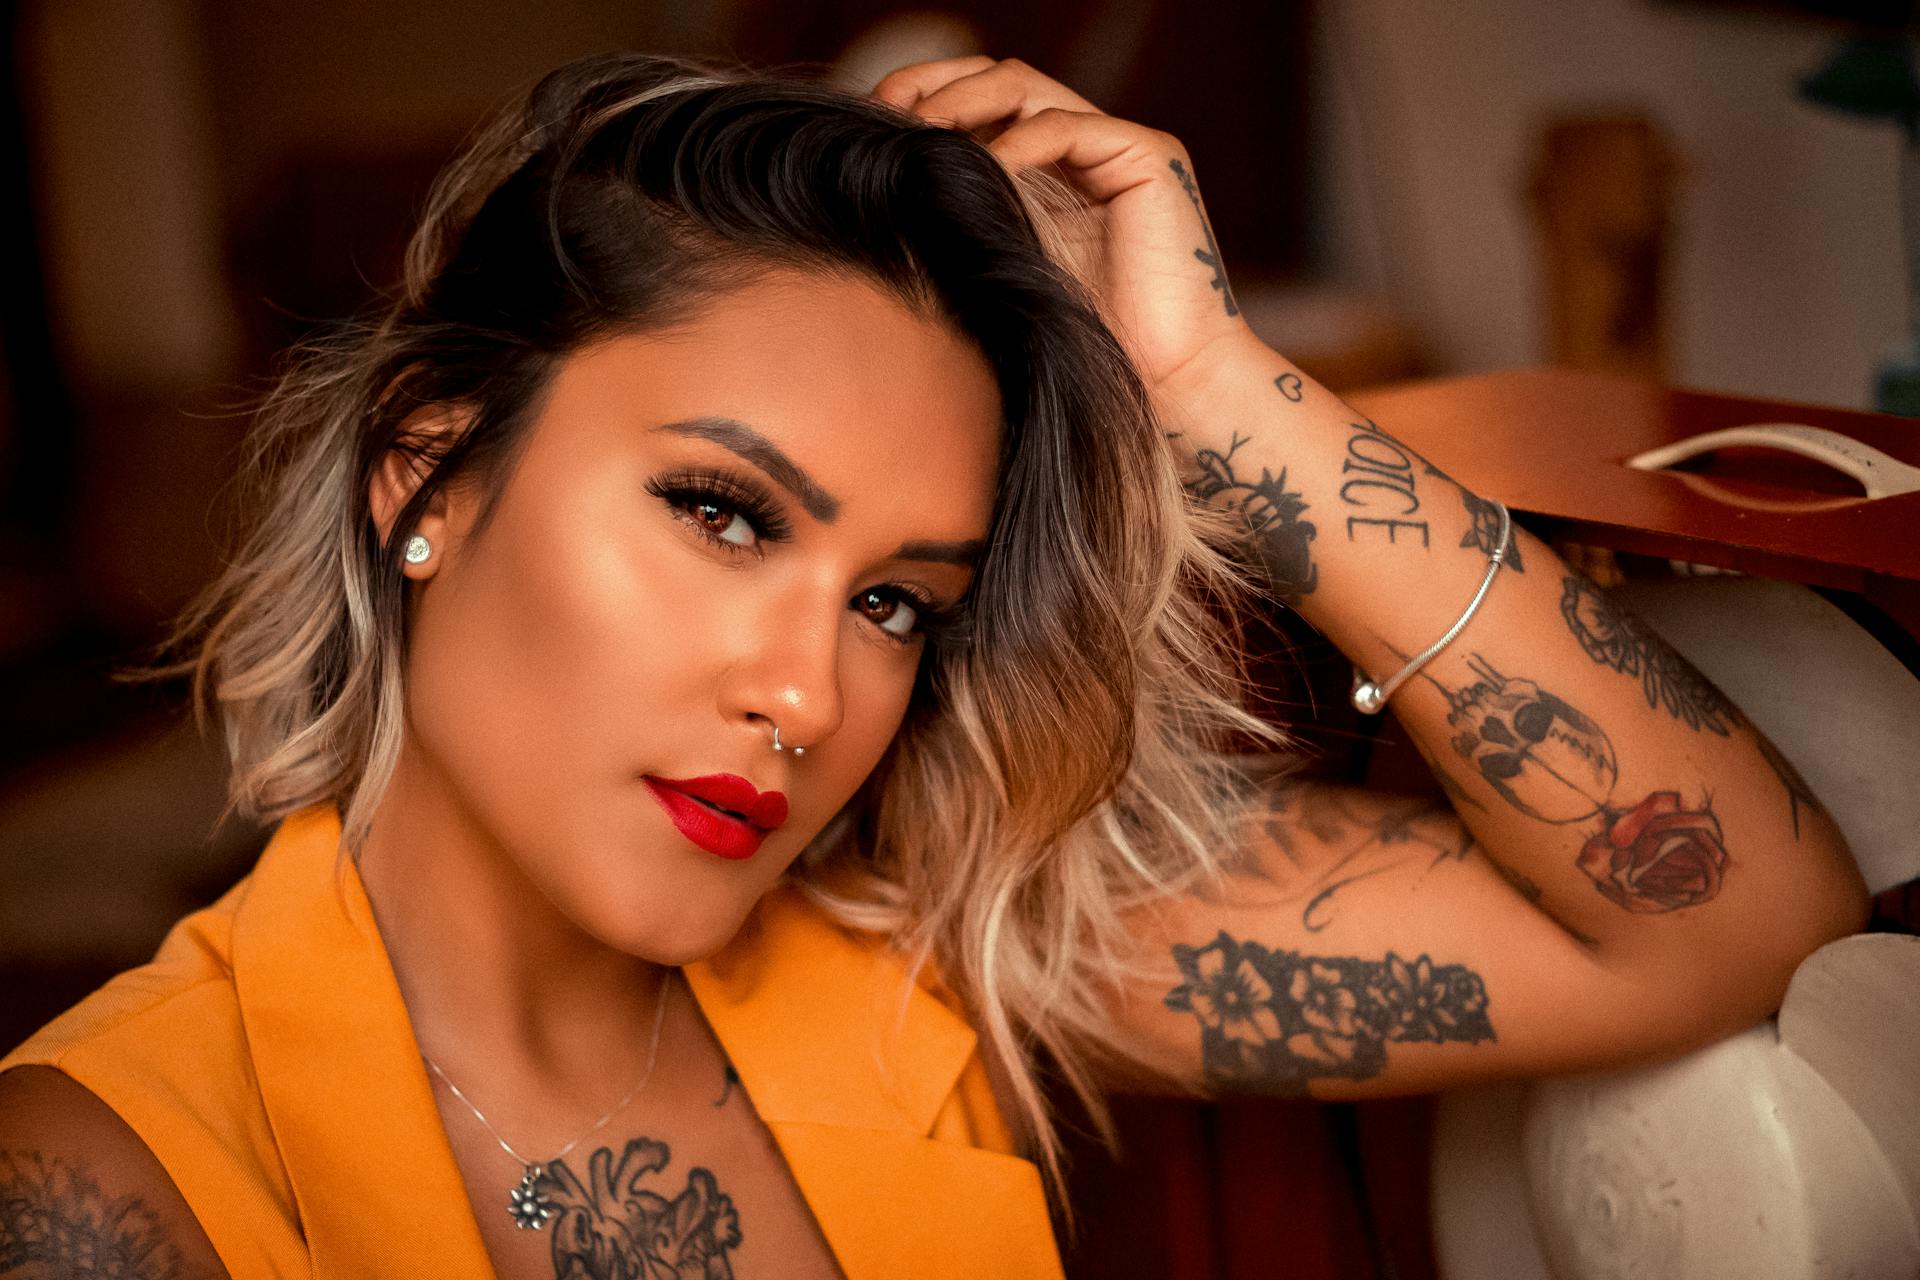 A woman with red lipstick and tattoos | Source: Pexels